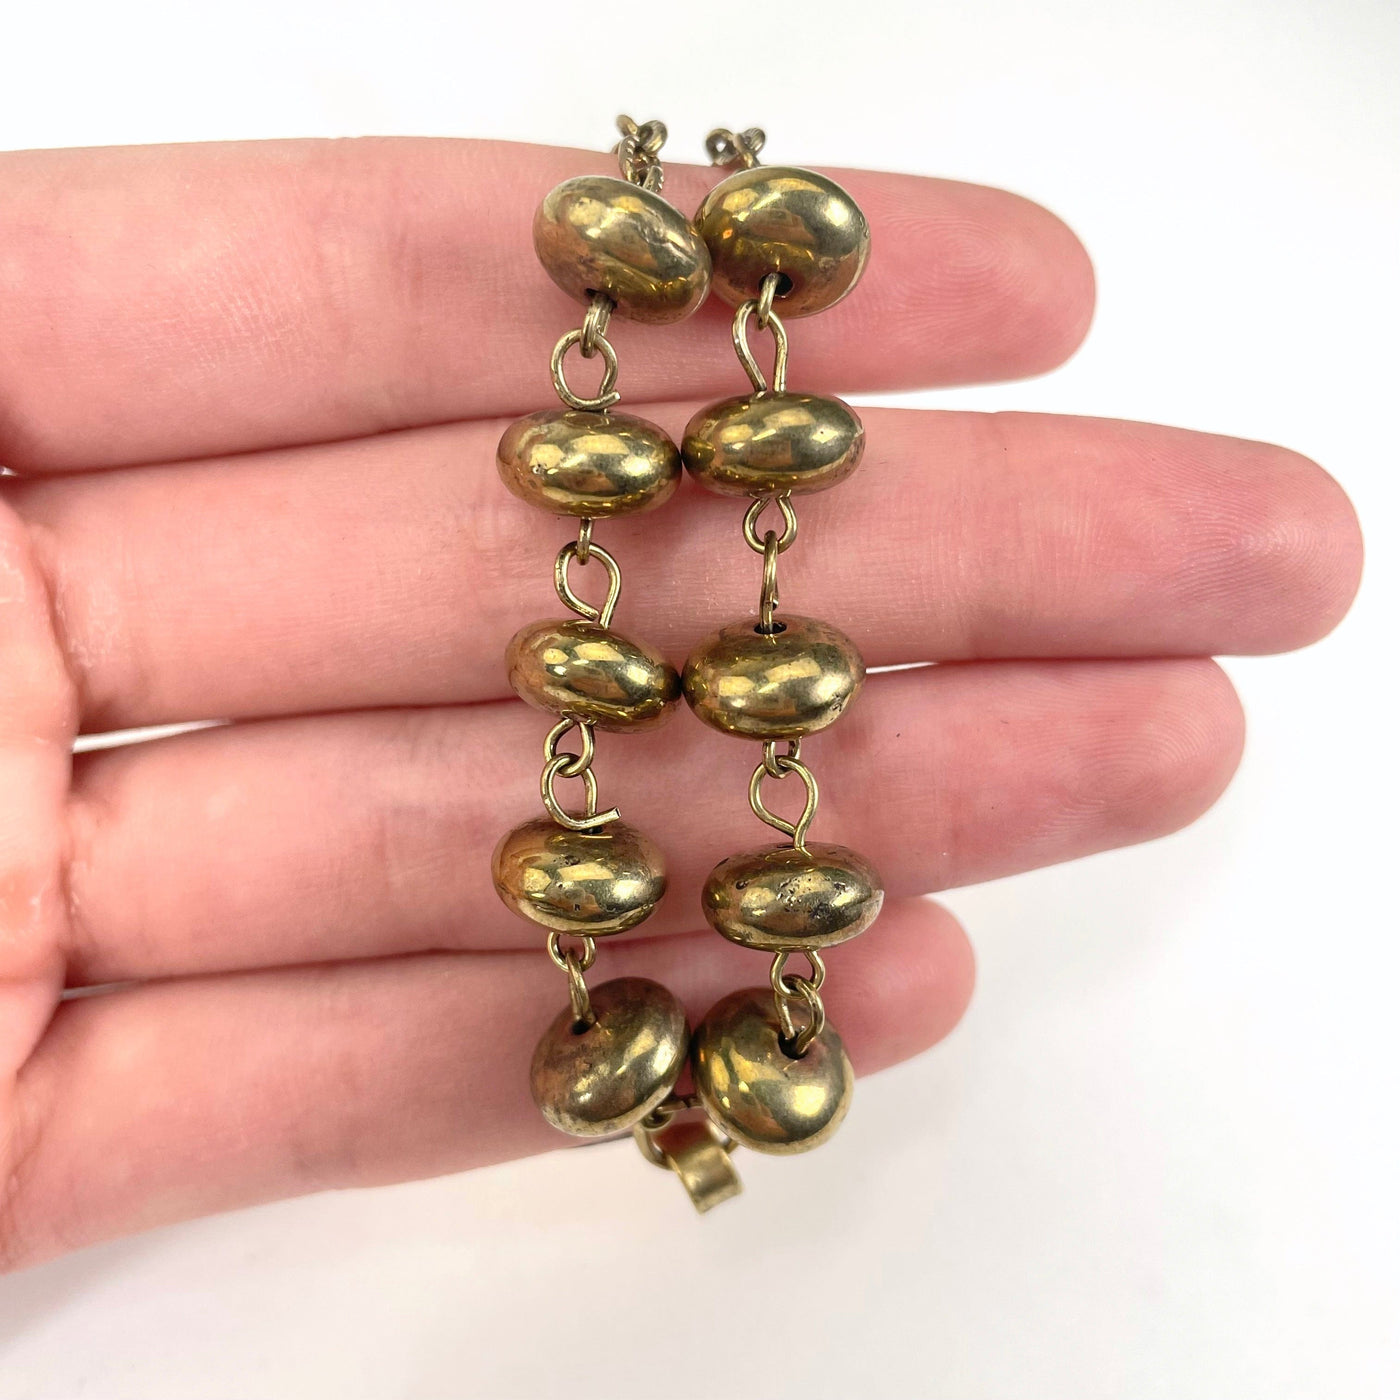 close up of tier 4 beads in hand for size reference and details